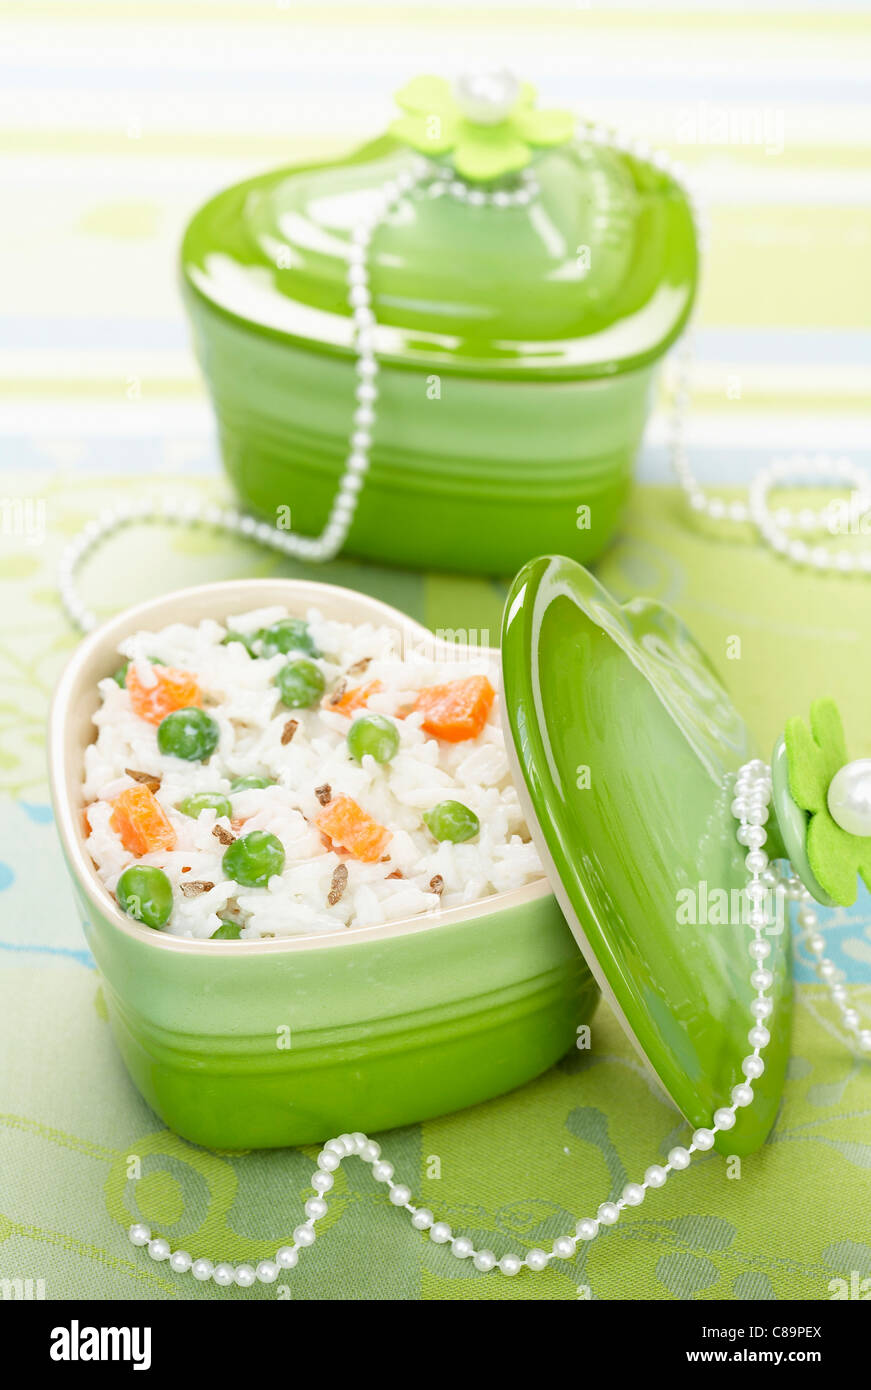 Mini casserole dish of rice and vegetables Stock Photo